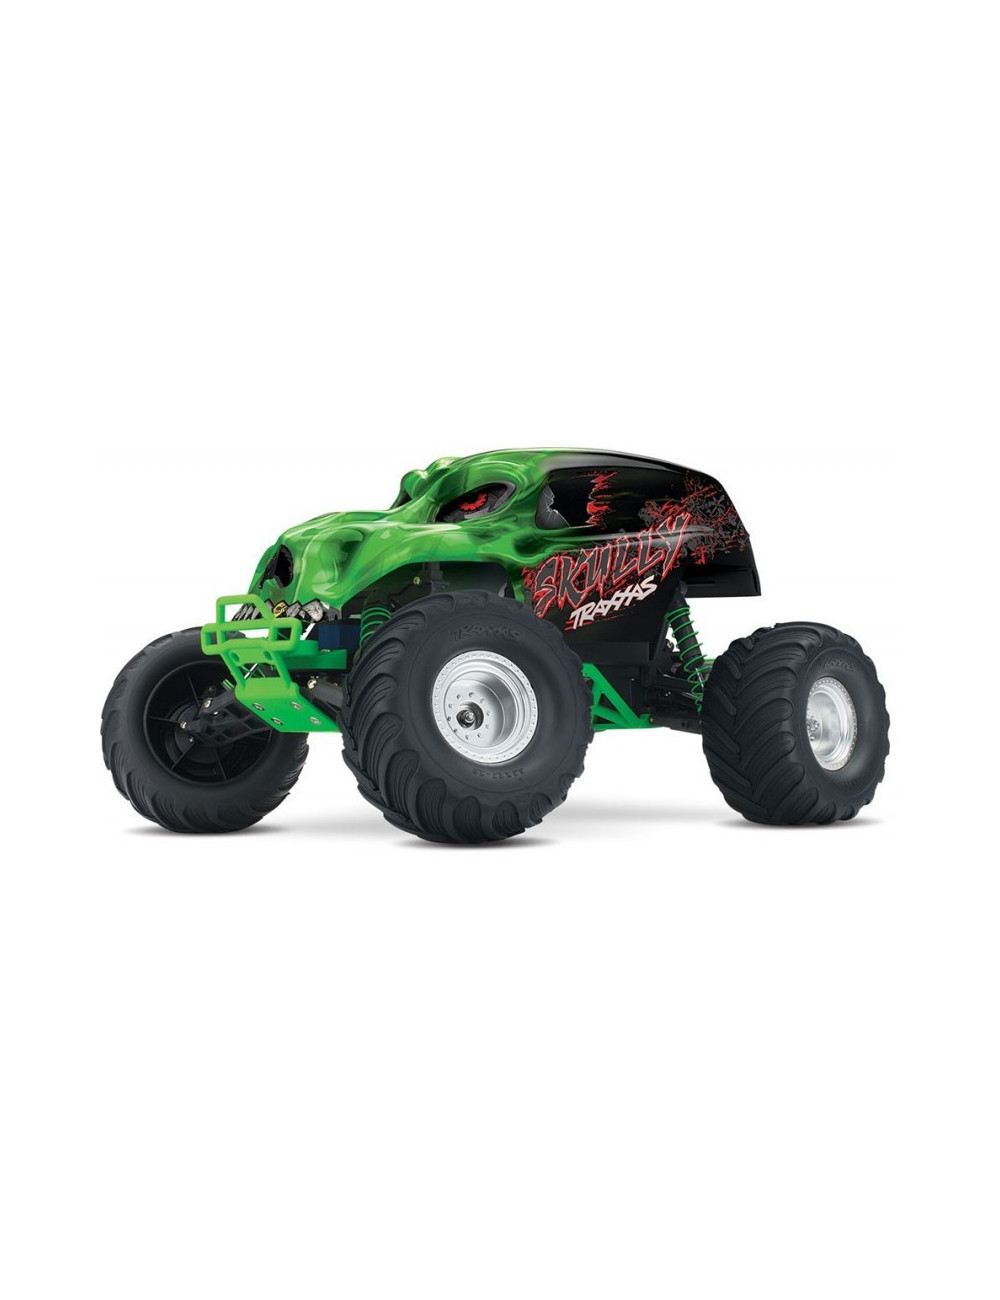 TRAXXAS STAMPEDE 1:10 SKULLY RTR